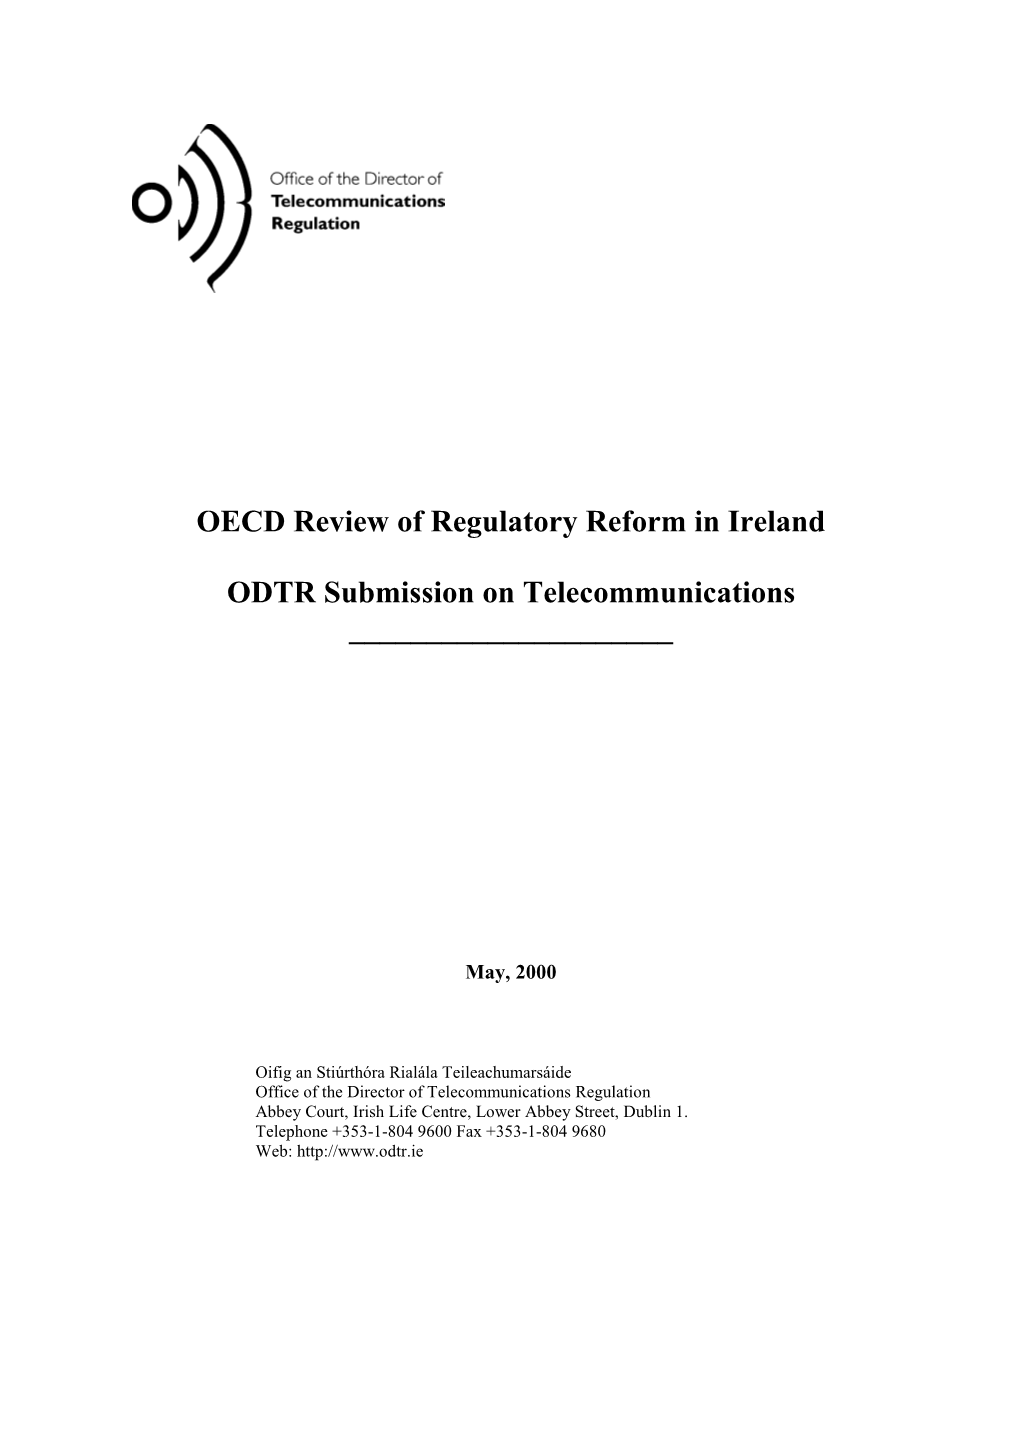 OECD Review of Regulatory Reform in Ireland ODTR Submission On